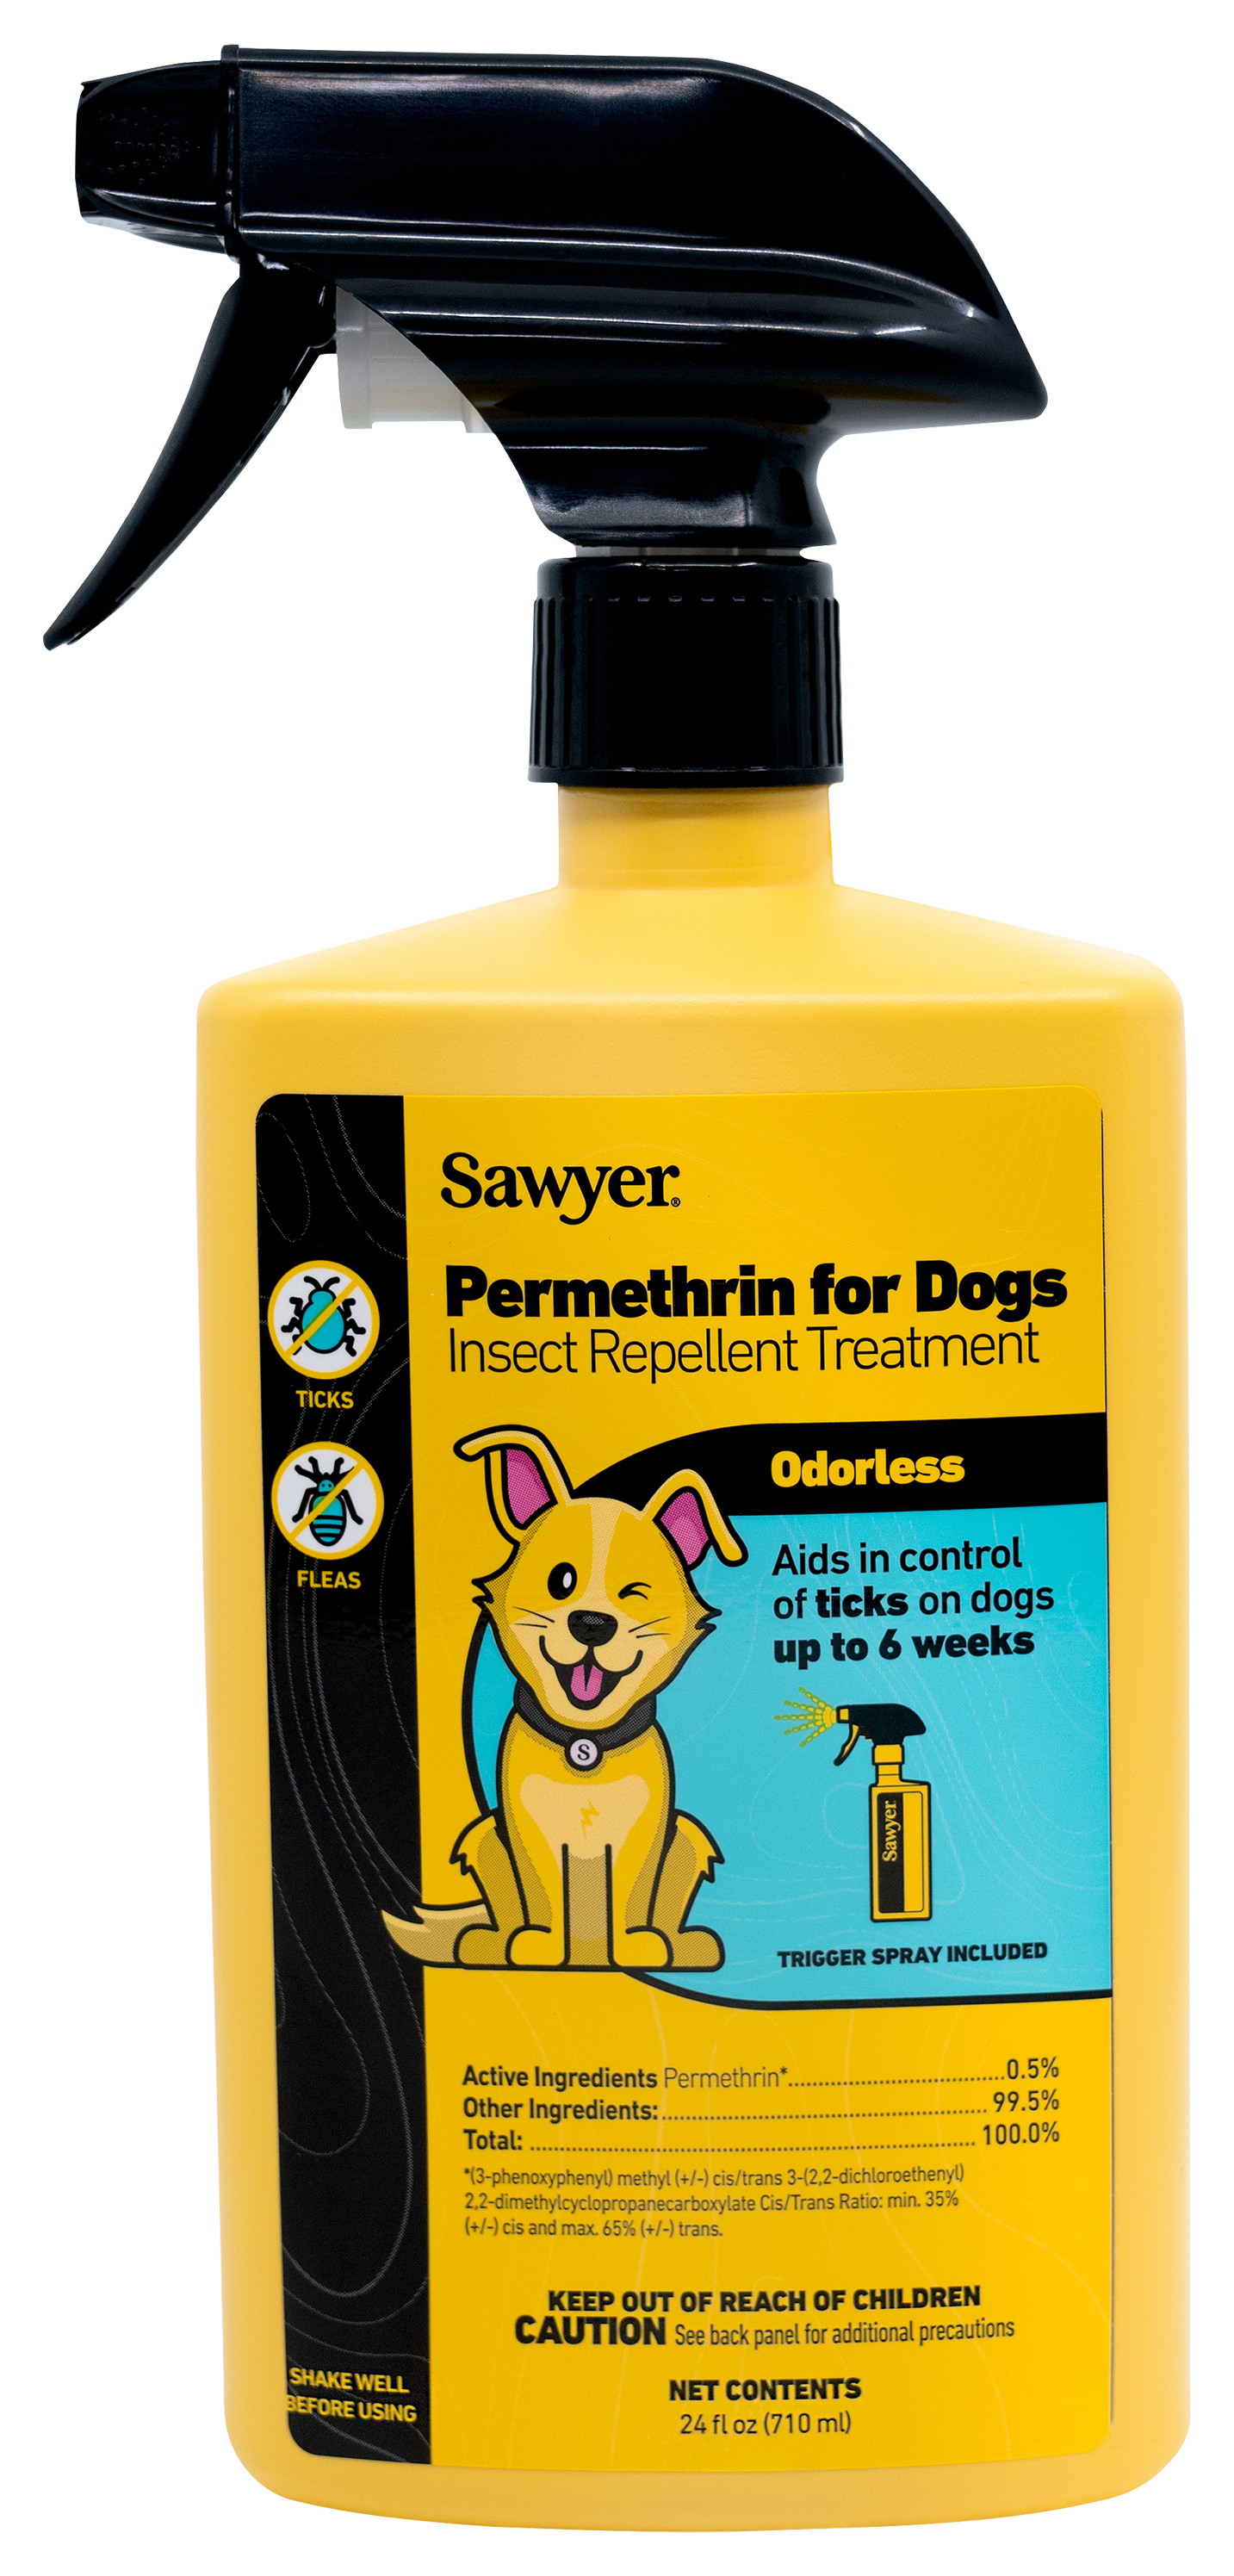 Sawyer Permethrin Insect Repellent Treatment for Dogs